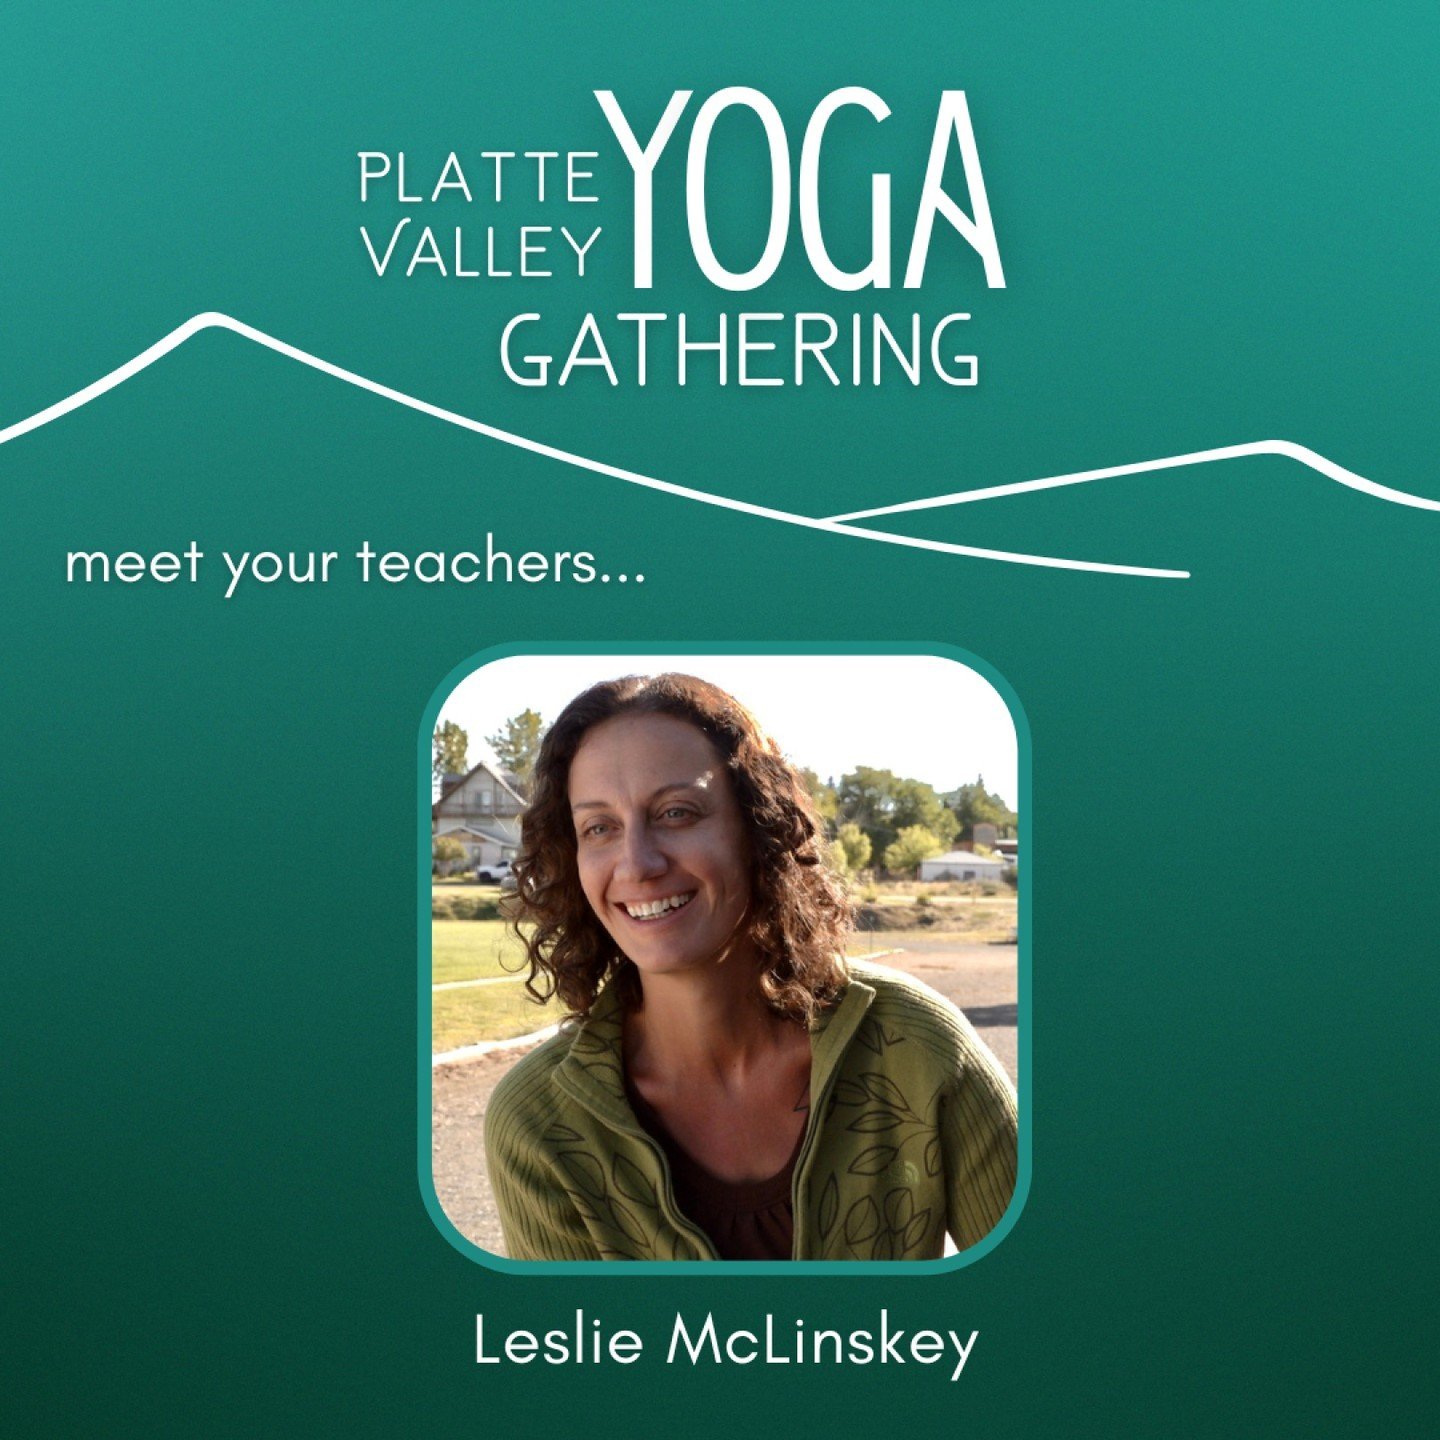 Meet your Platte Valley Yoga Teachers!

Leslie McLinskey - 500 RYT

&quot;Leslie McLinskey is a veteran secondary English teacher at Encampment K-12 School. A long-time resident of the valley, she and her family love the close community connections a